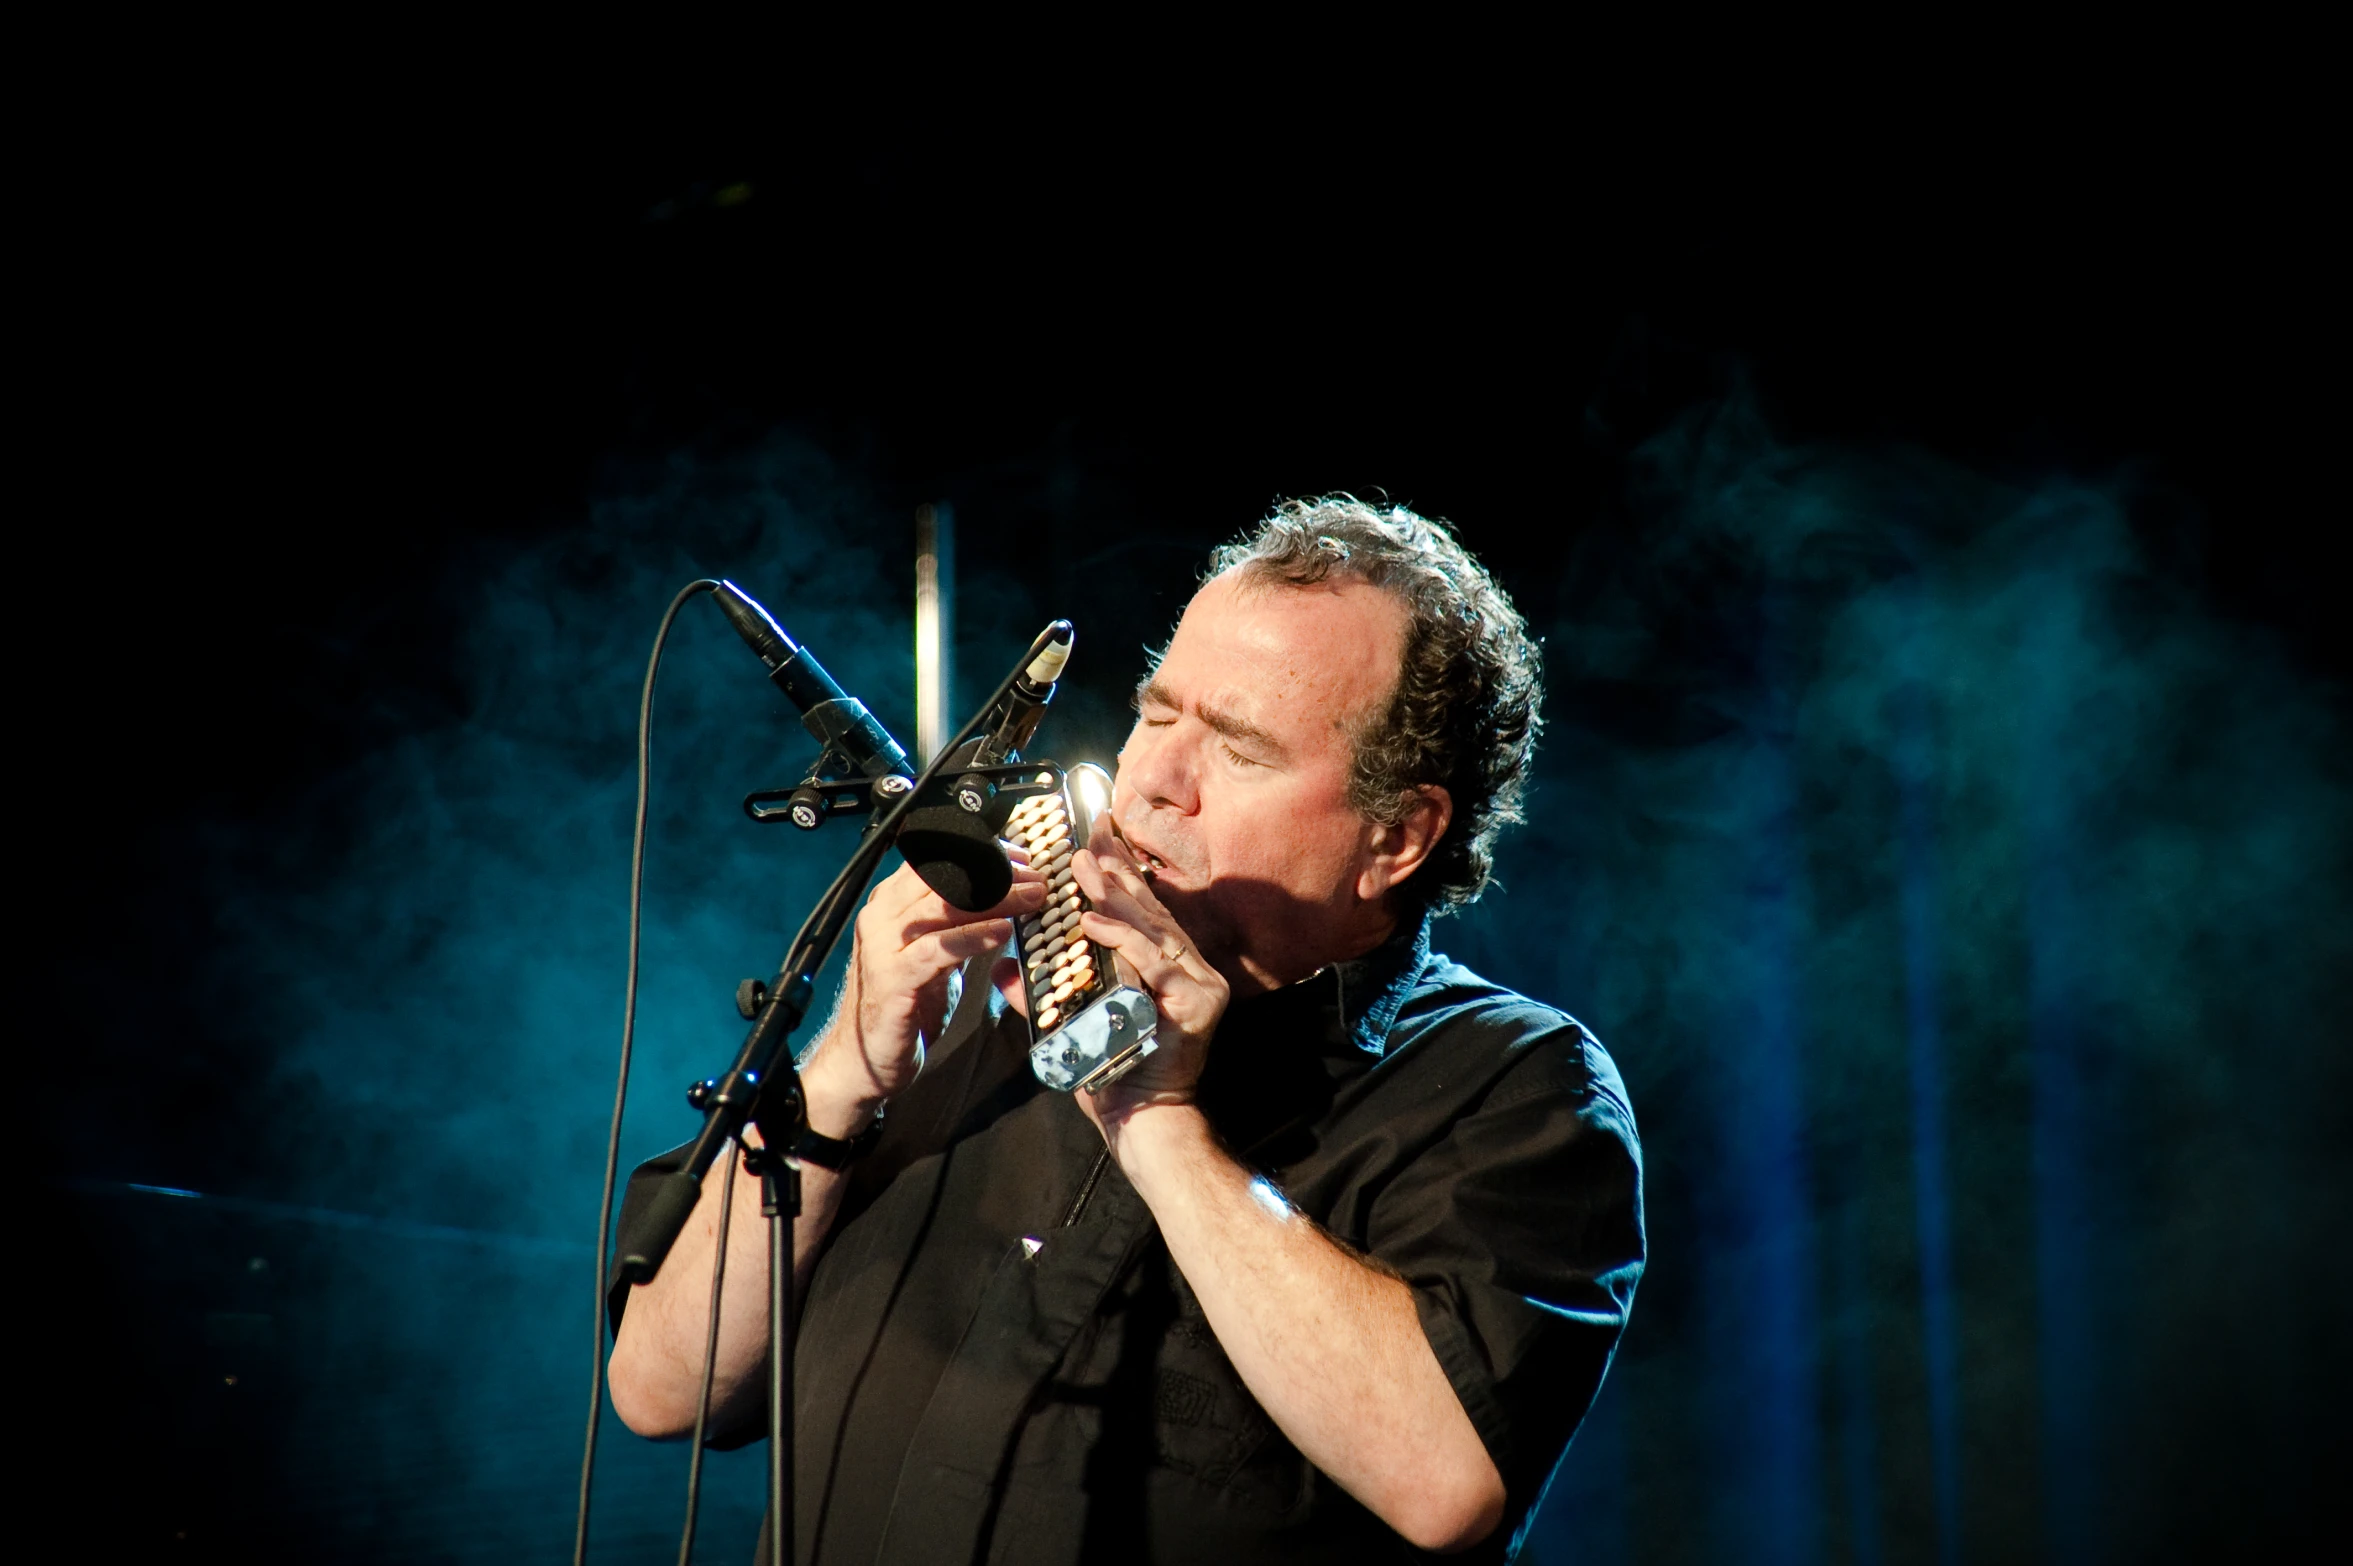 a man singing into a microphone at night